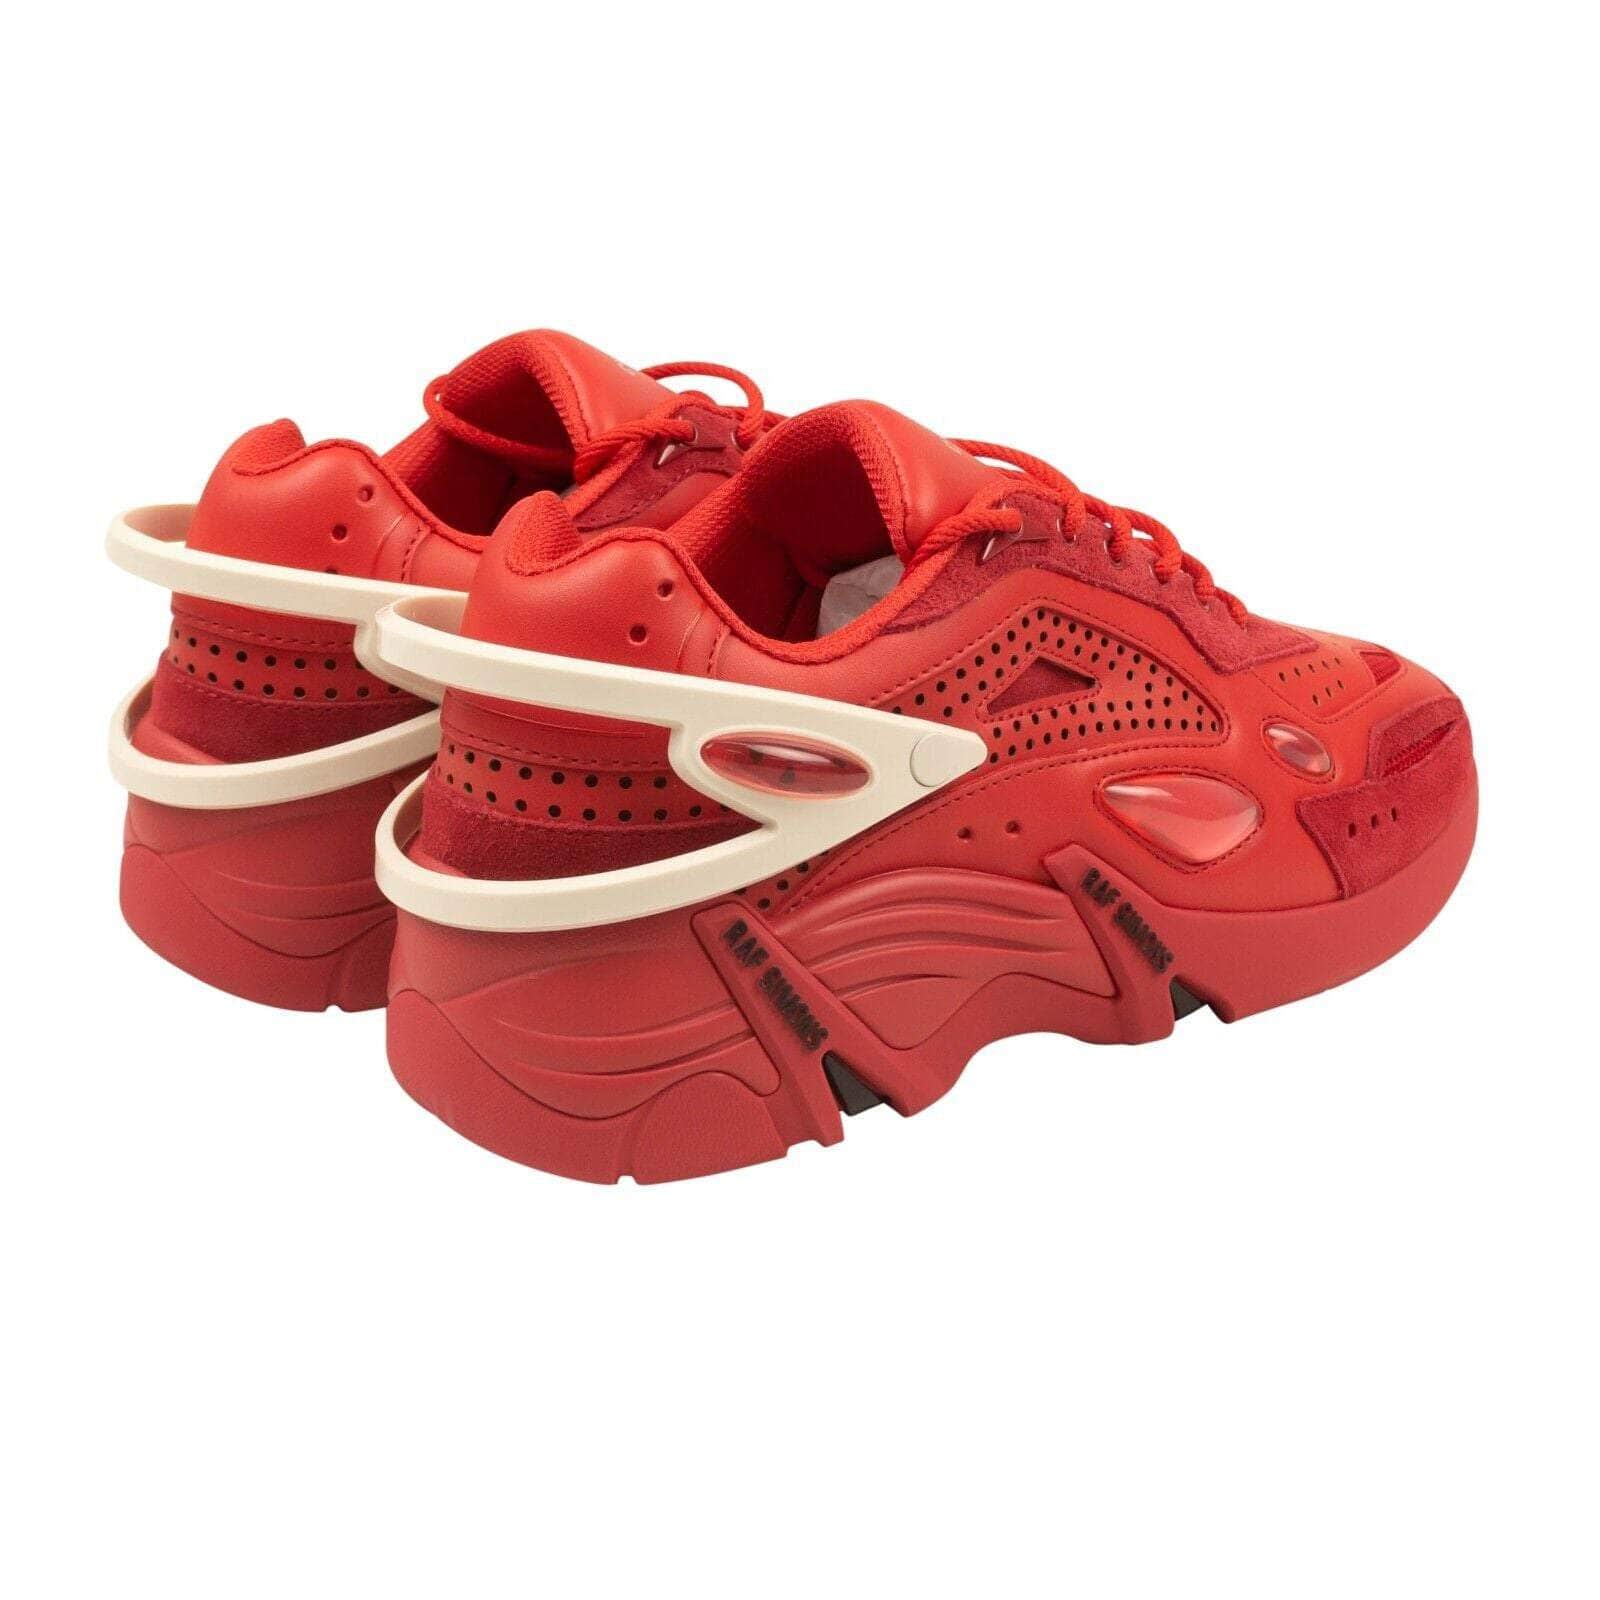 Raf Simons 250-500, channelenable-all, chicmi, couponcollection, gender-mens, main-shoes, mens-shoes, size-41, size-42, size-43, size-44, size-45, size-46 Red Leather Cyclon 21 Sneakers